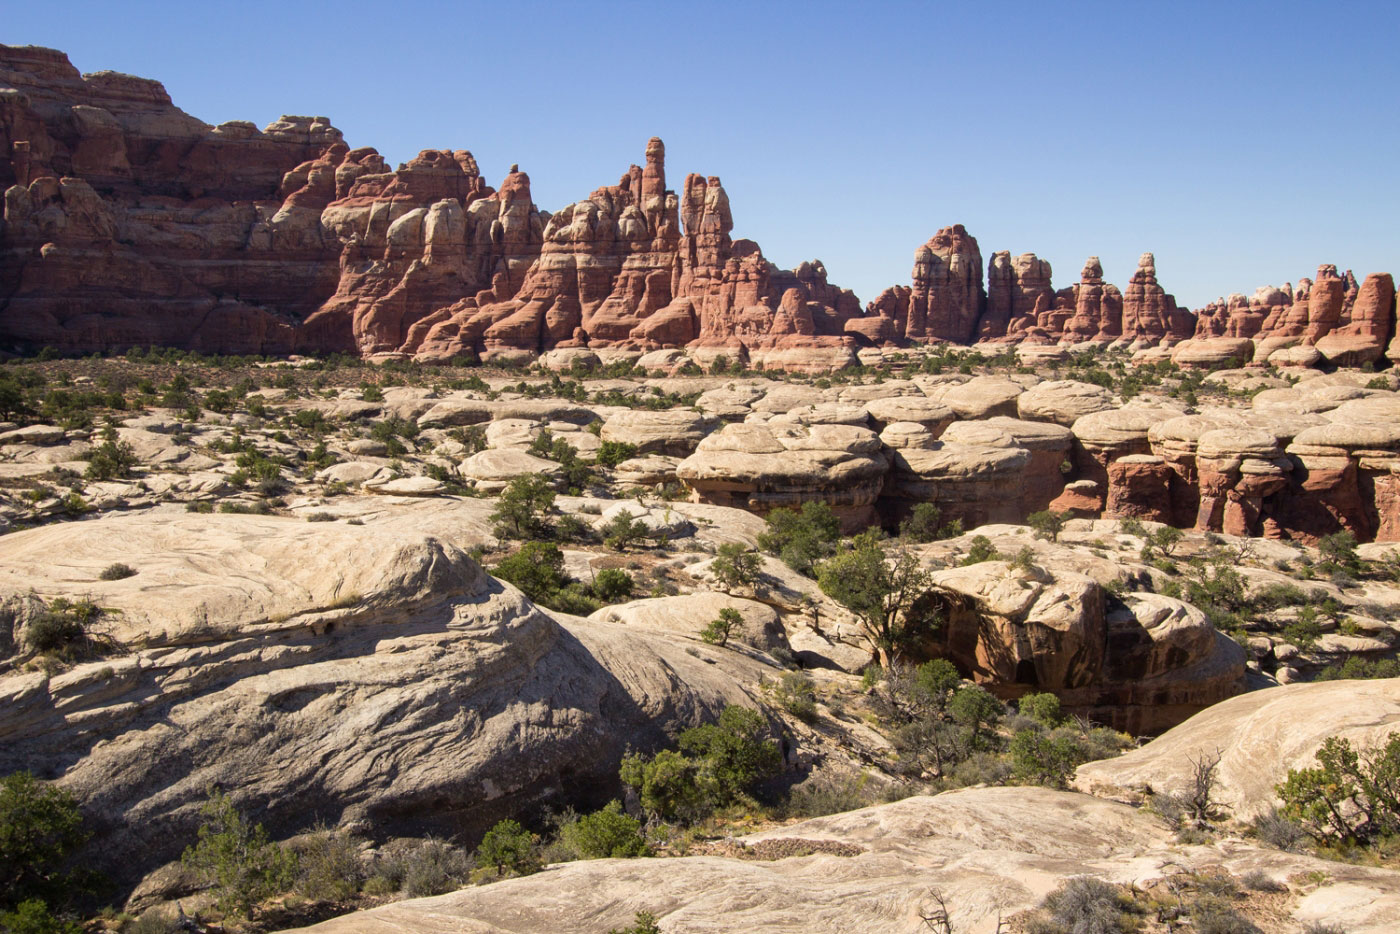 Hike Chesler Park and Joint Trail in Canyonlands National Park, Utah - Stav is Lost